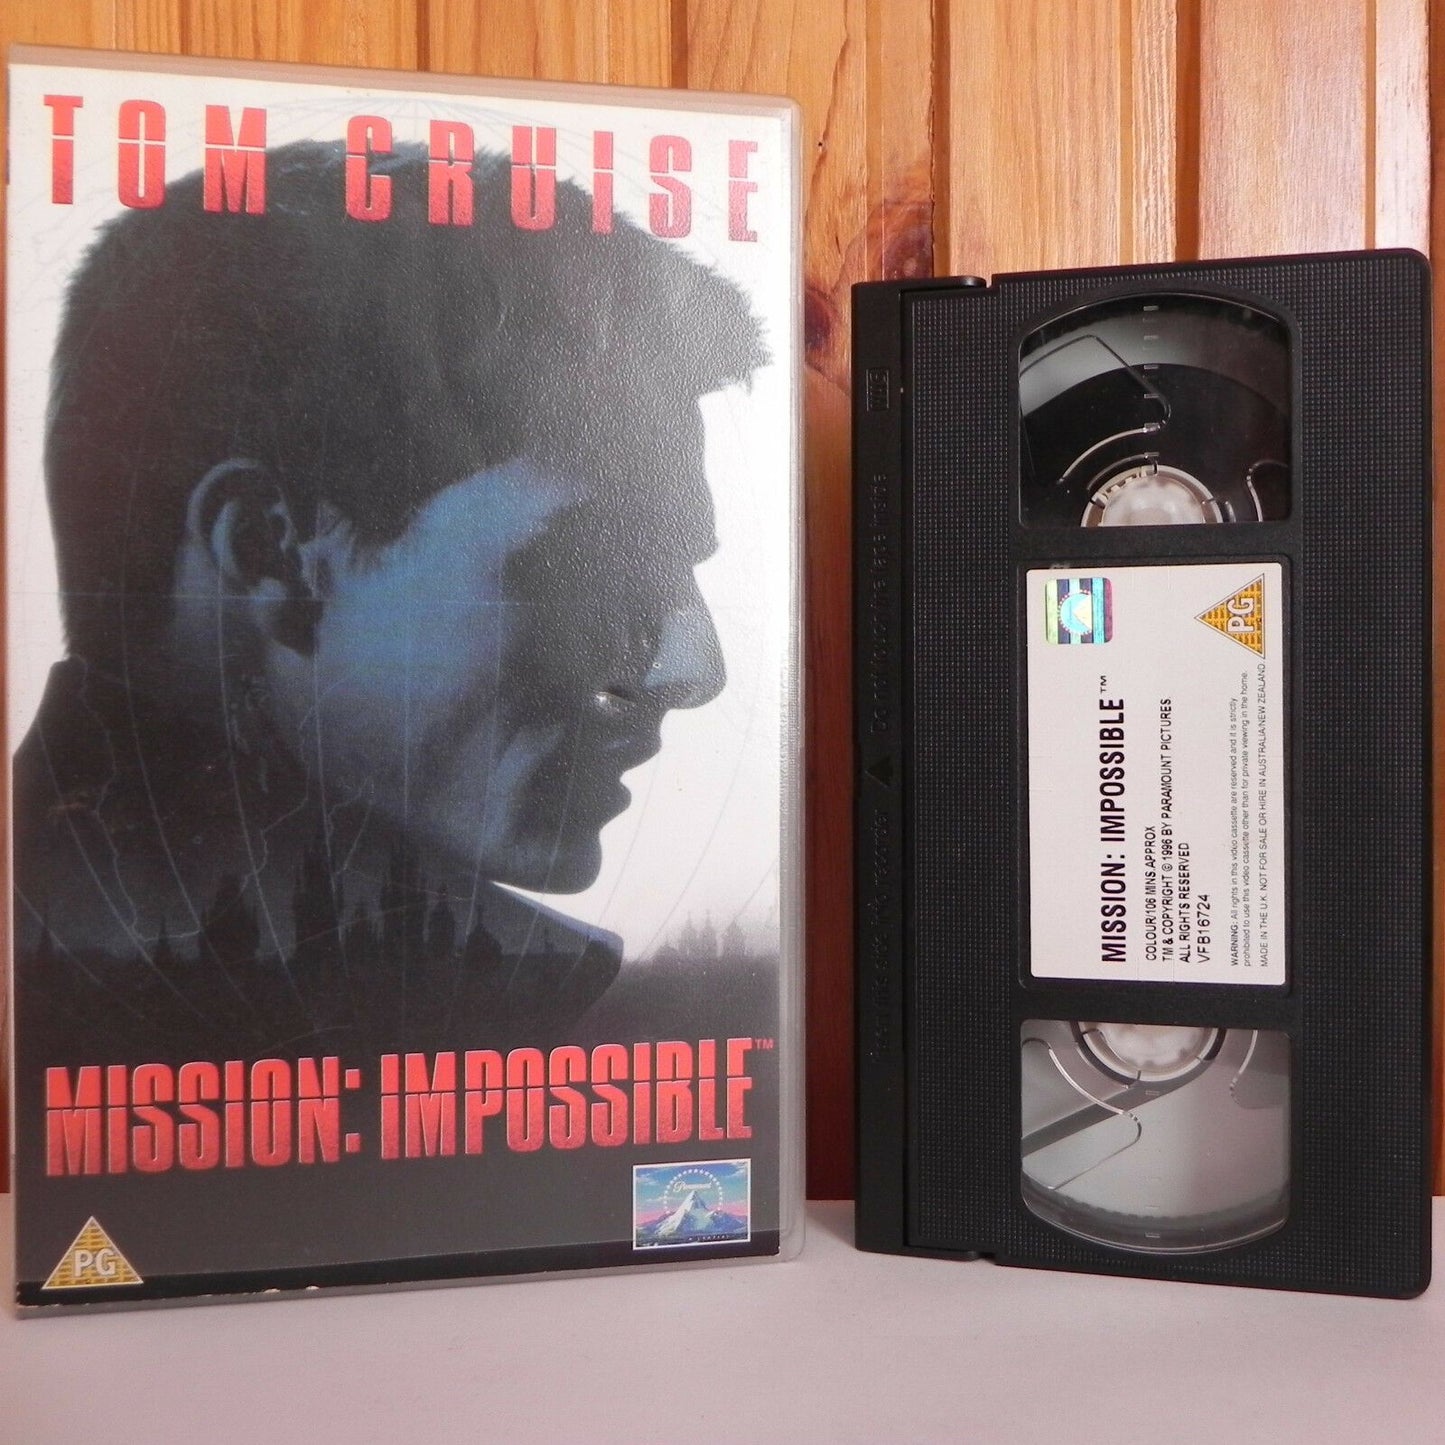 Mission: Impossible - Large Box - Paramount - Action - Sample - Tom Cruise - VHS-